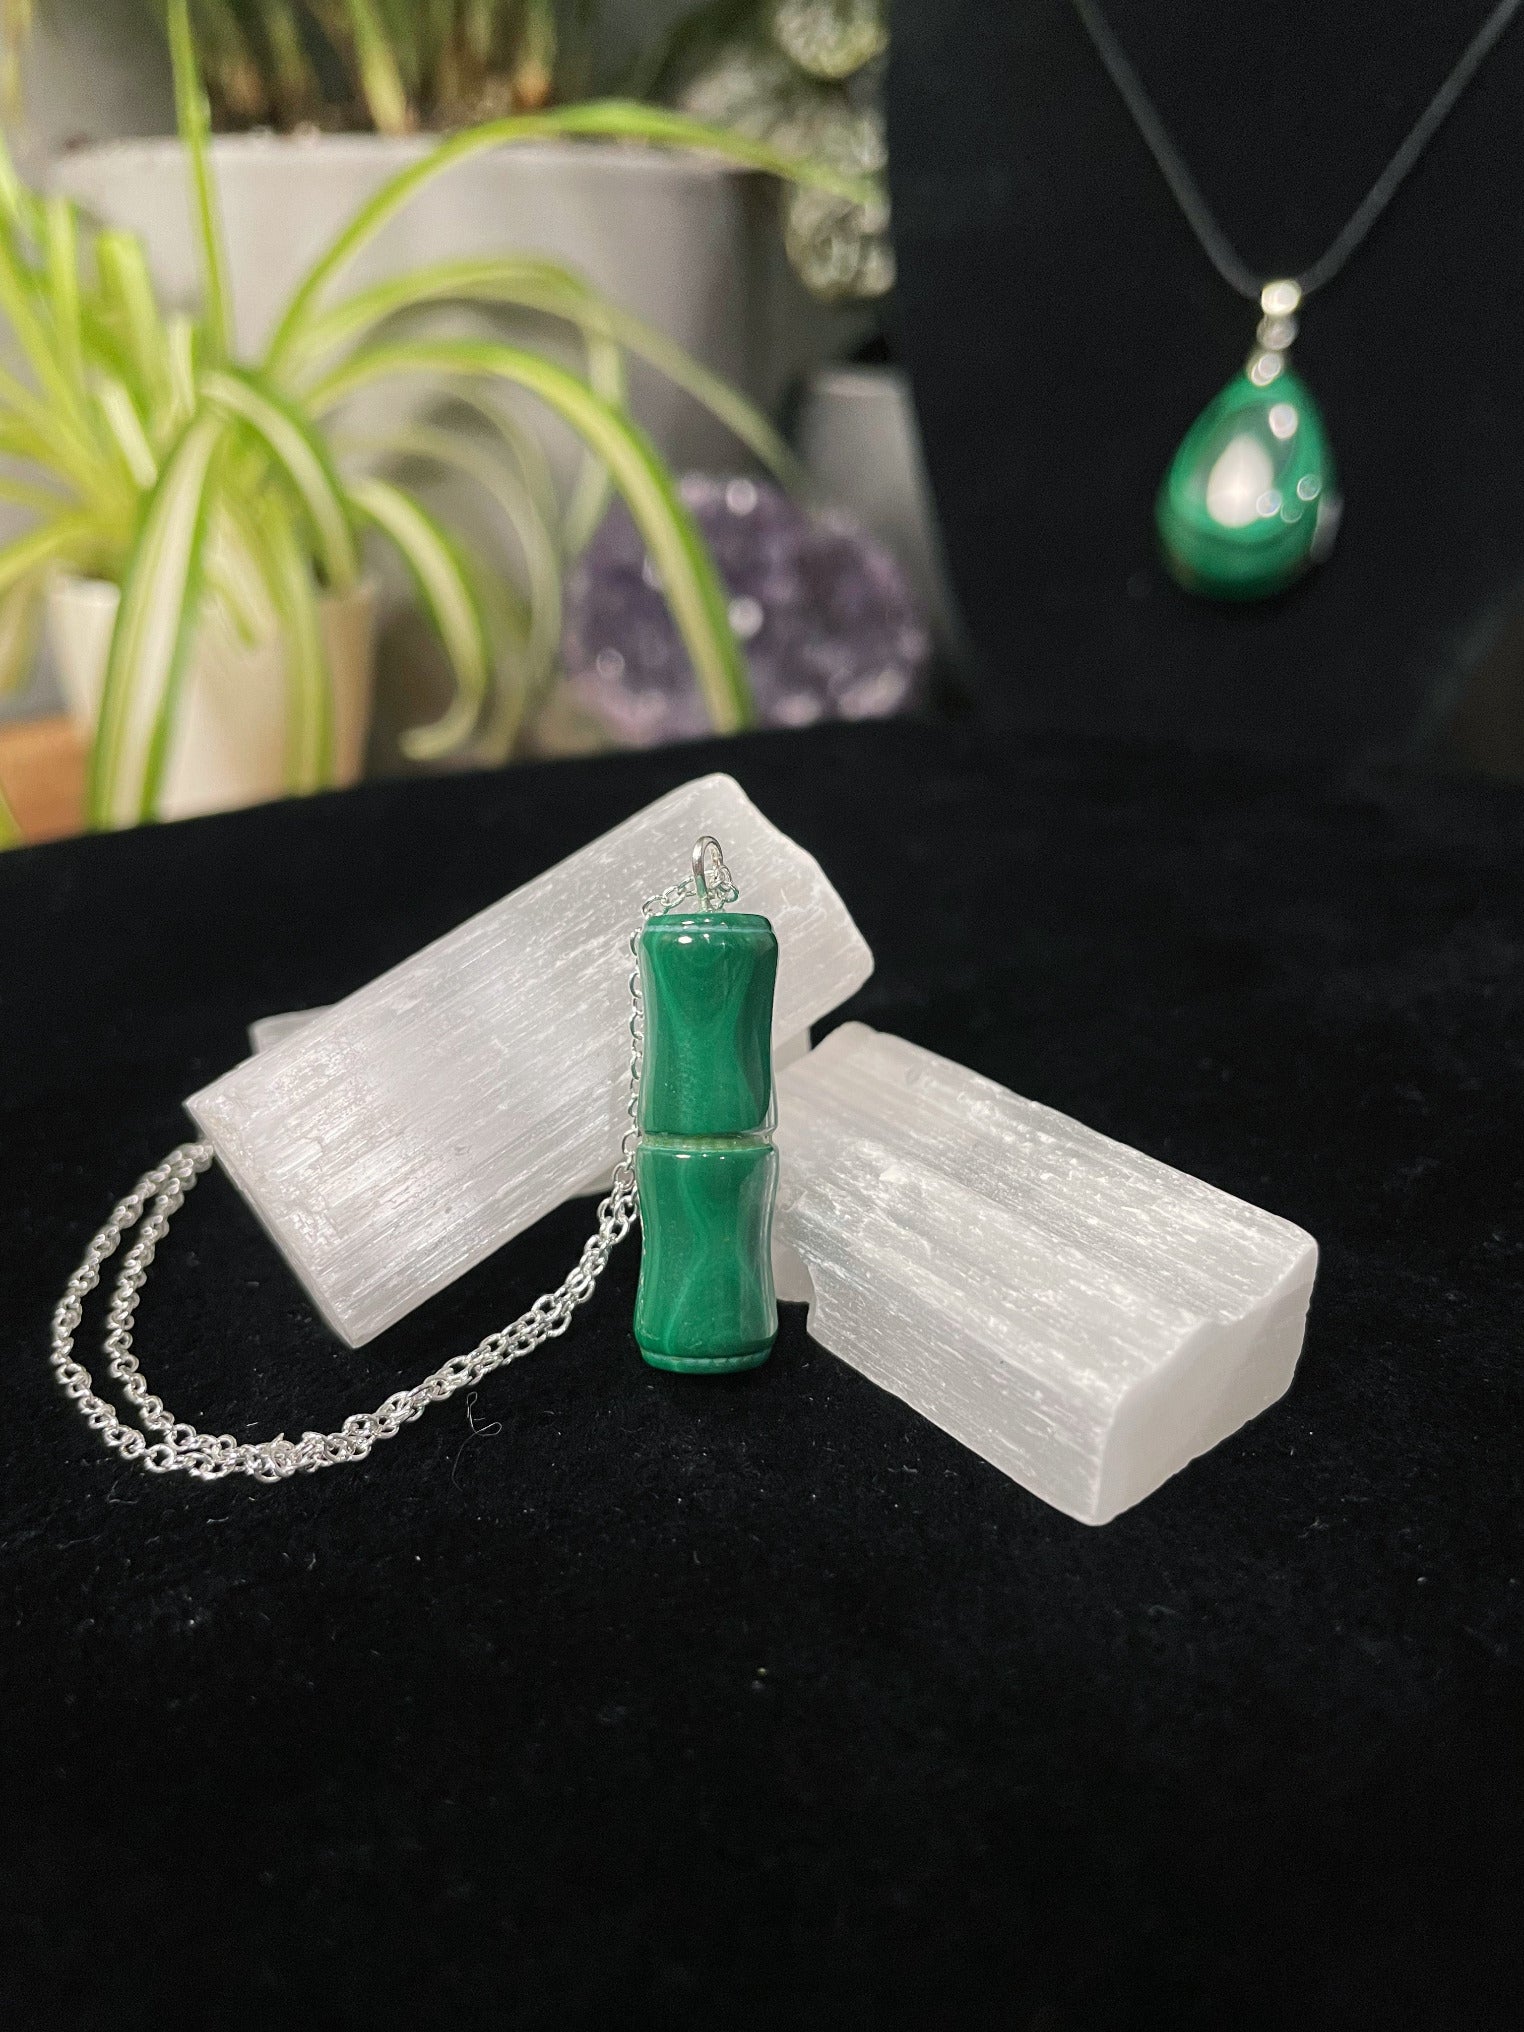 Pictured is a bamboo malachite necklace.